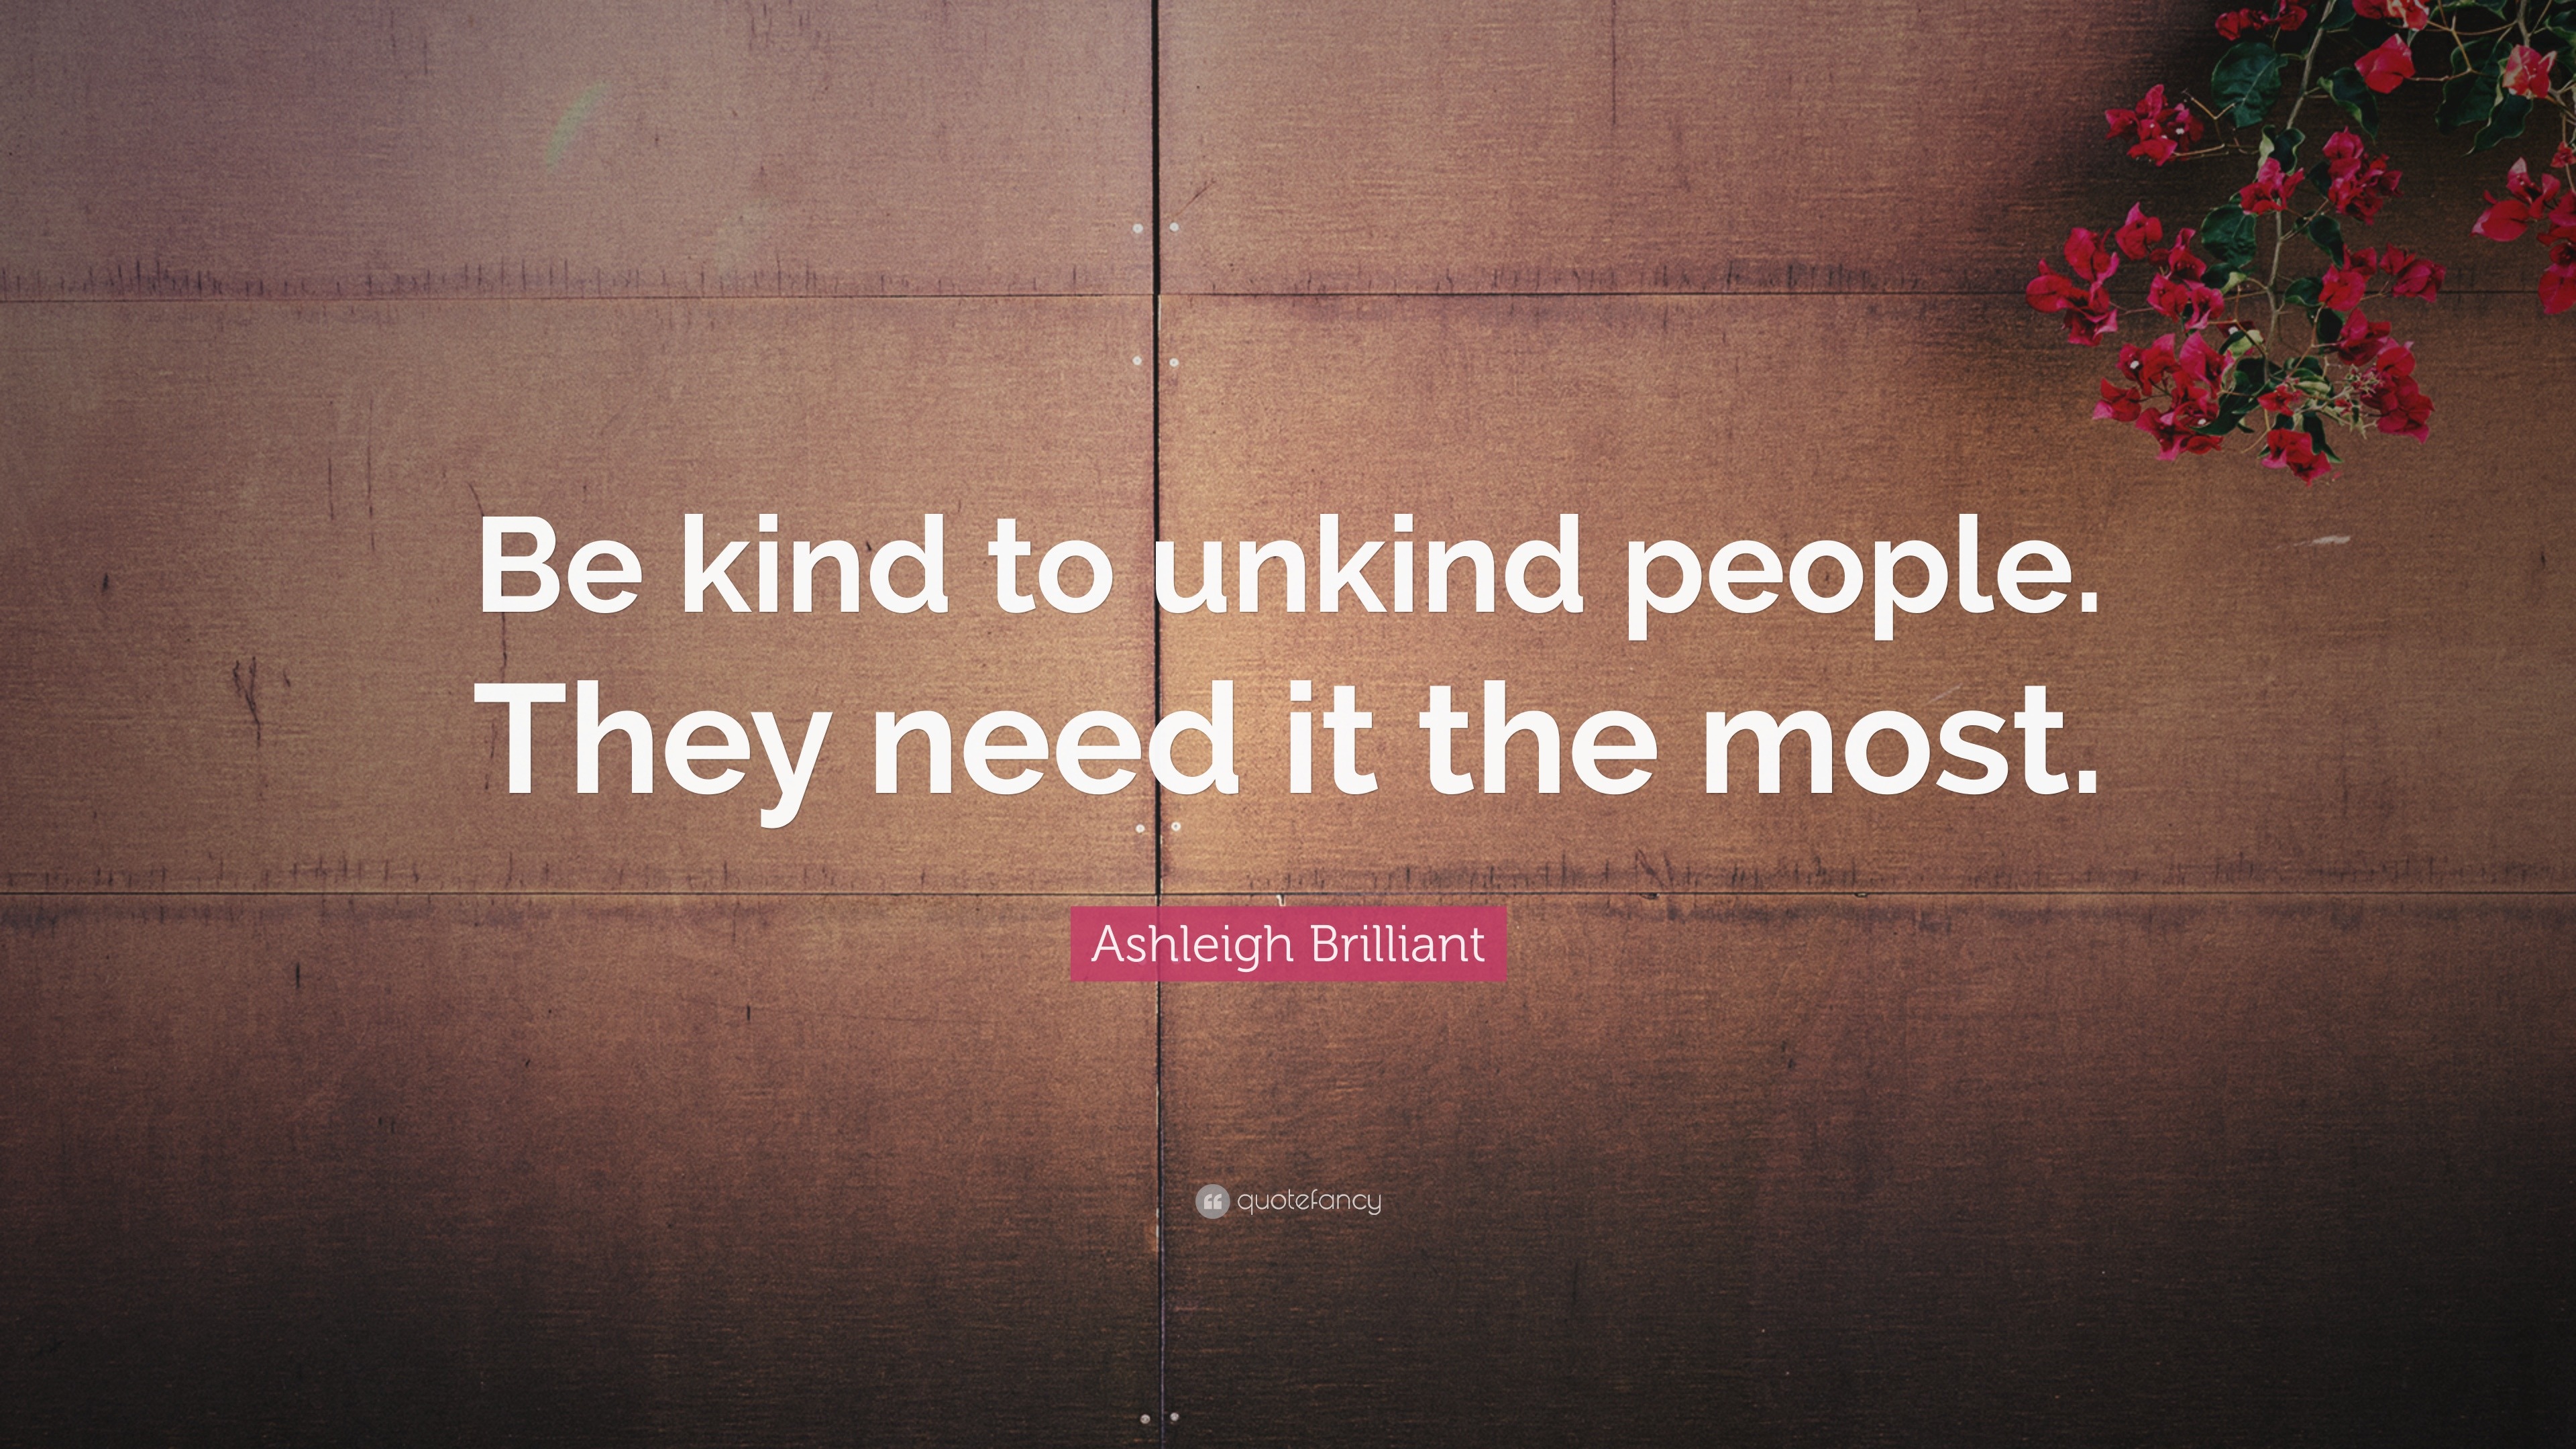 Ashleigh Brilliant Quote: “Be kind to unkind people. They need it the